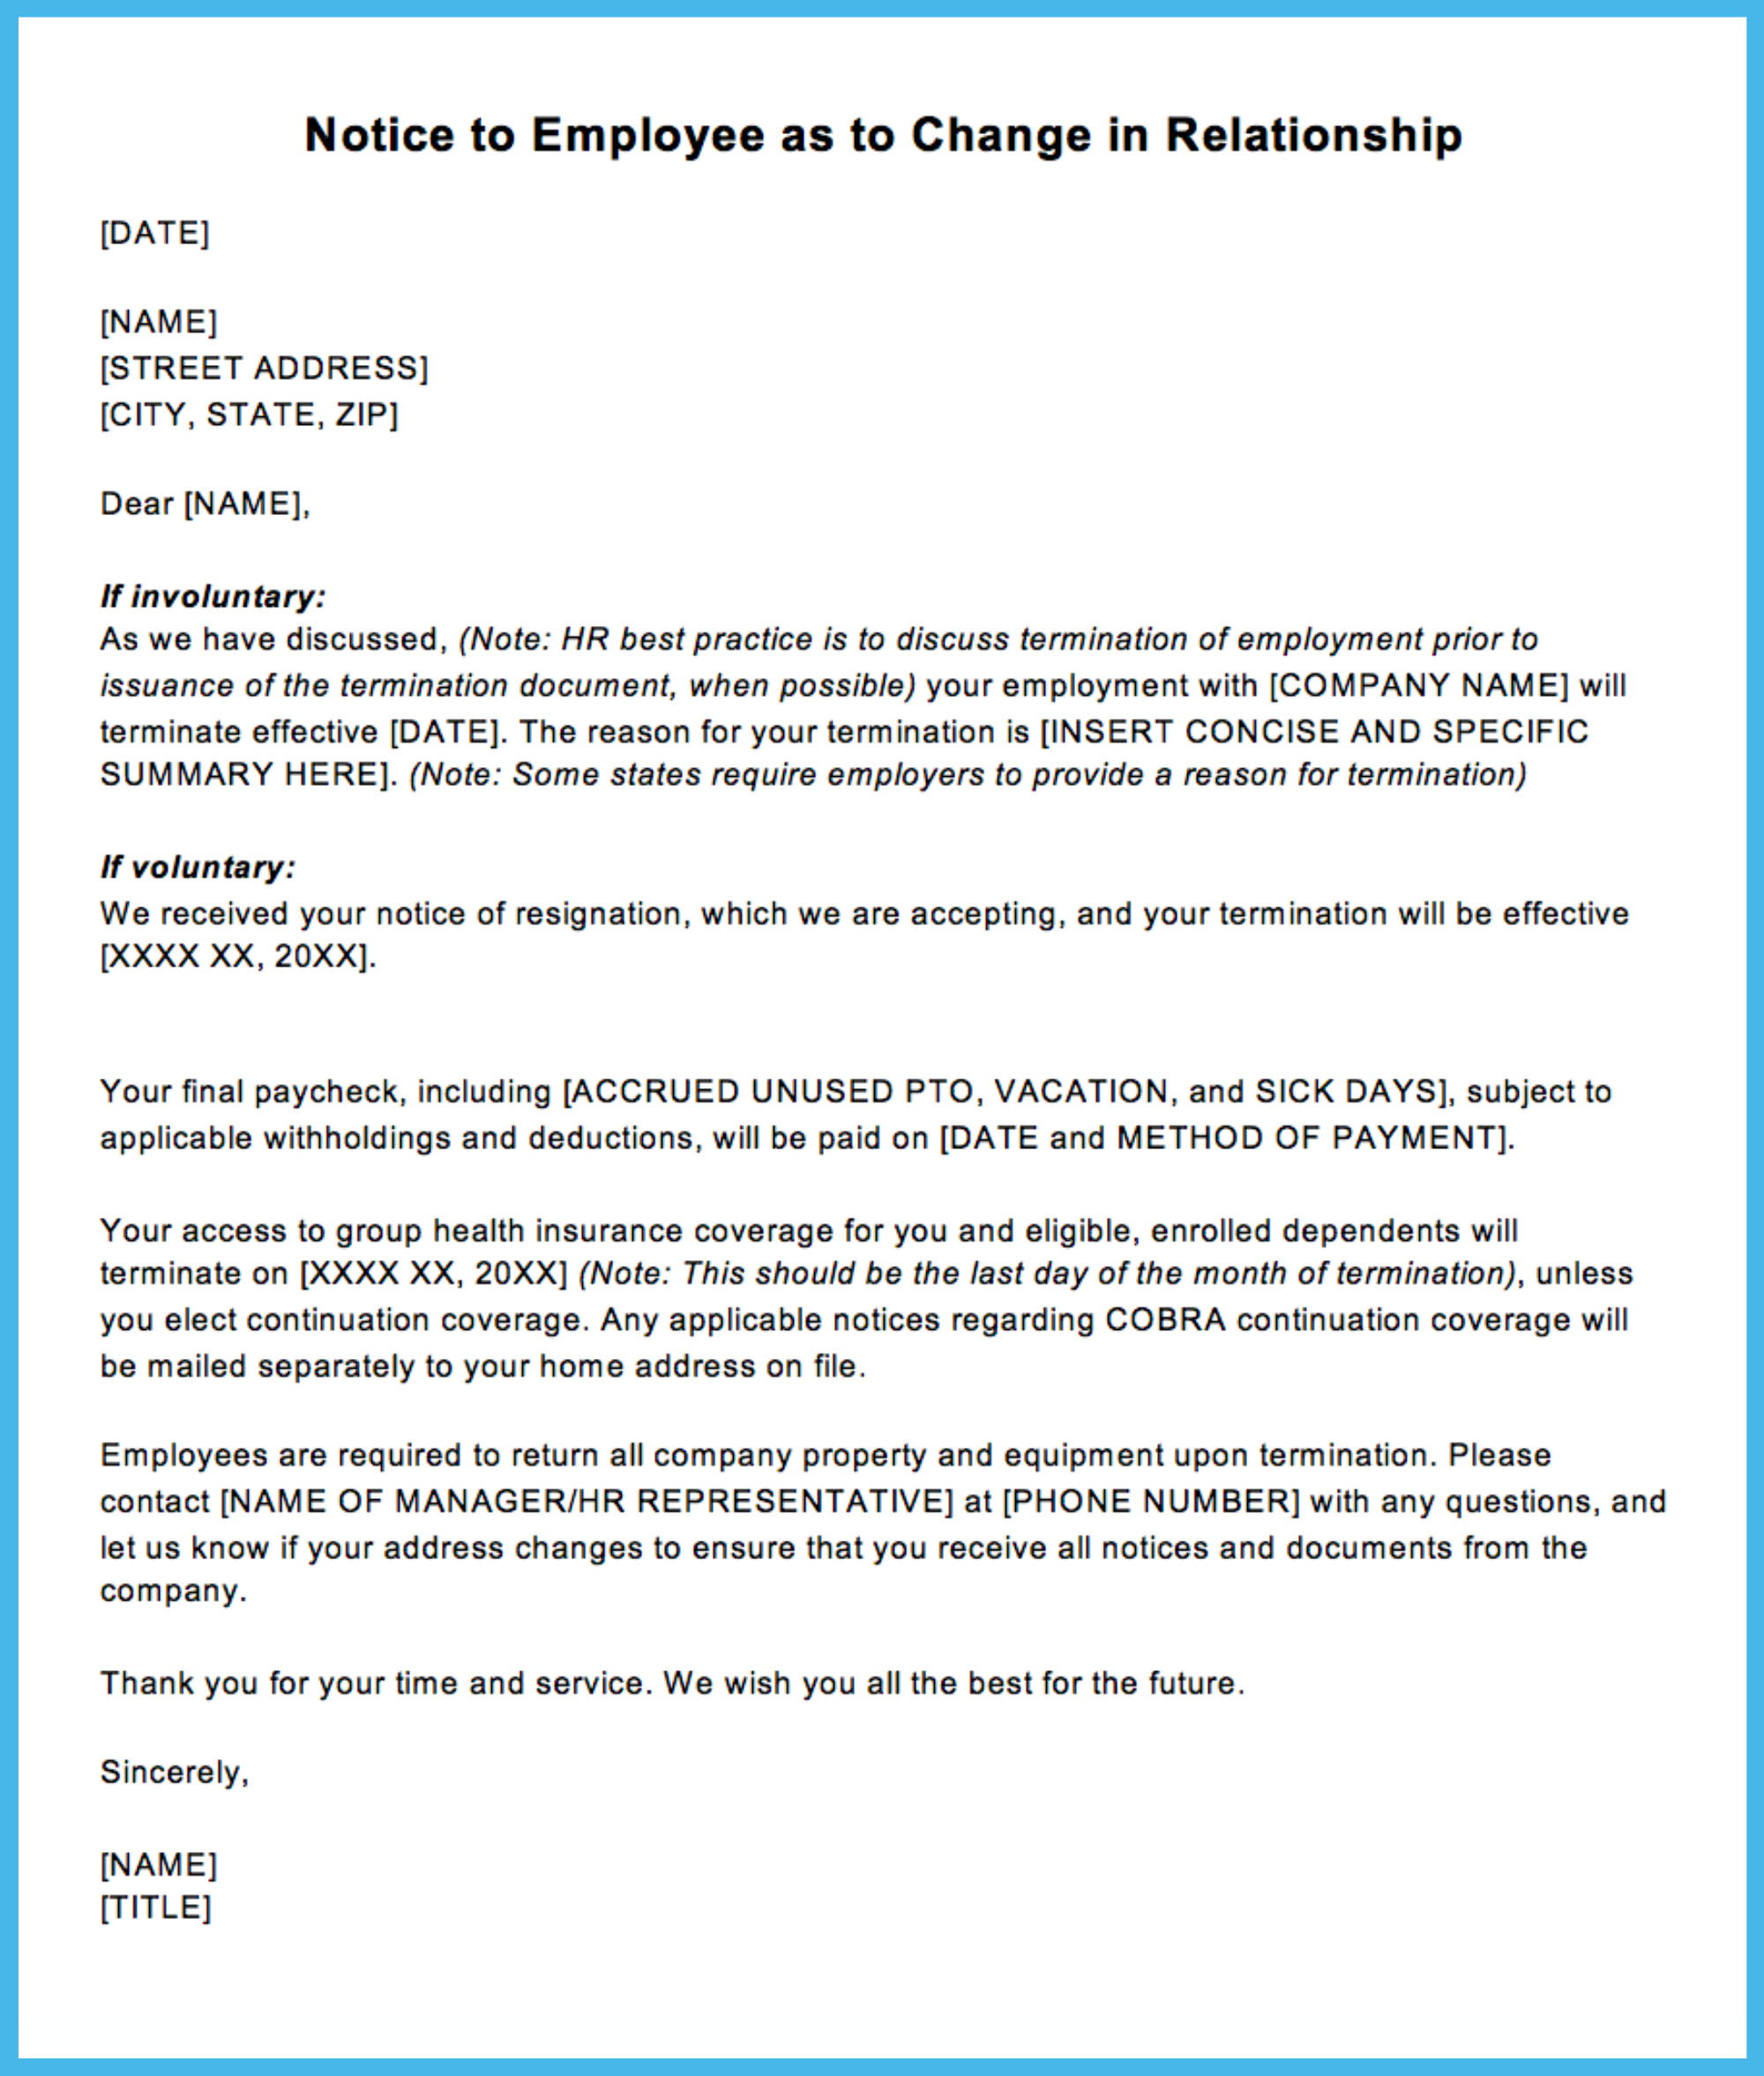 Sample Termination Letter For Letting An Employee Go Justworks